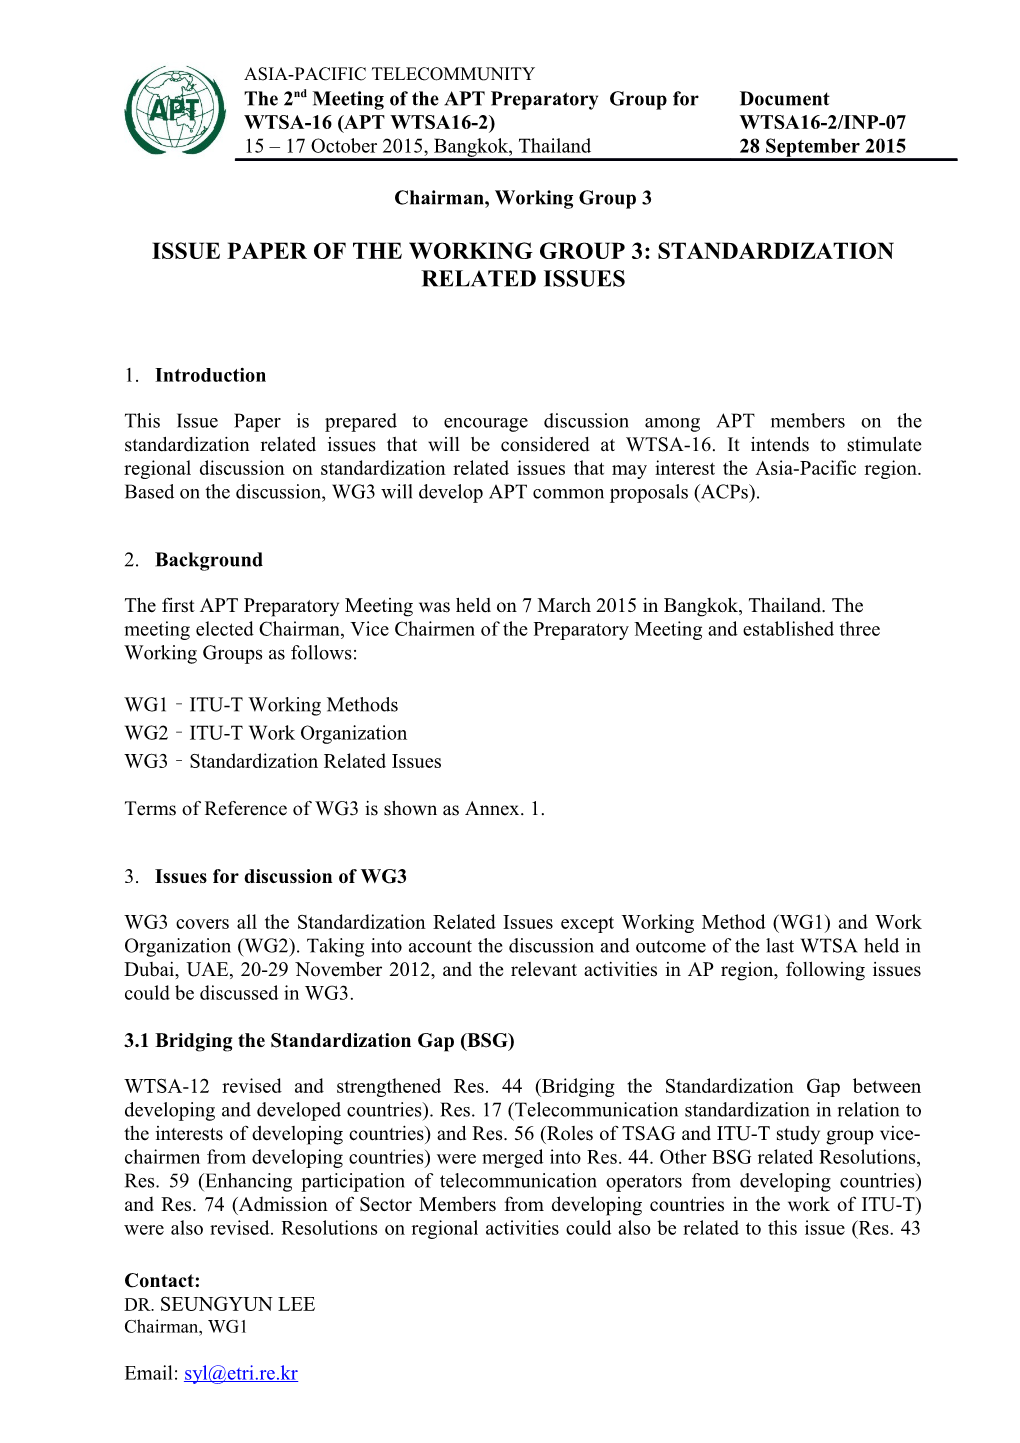 Issue Paper of the Working Group 3: Standardization RELATED ISSUES